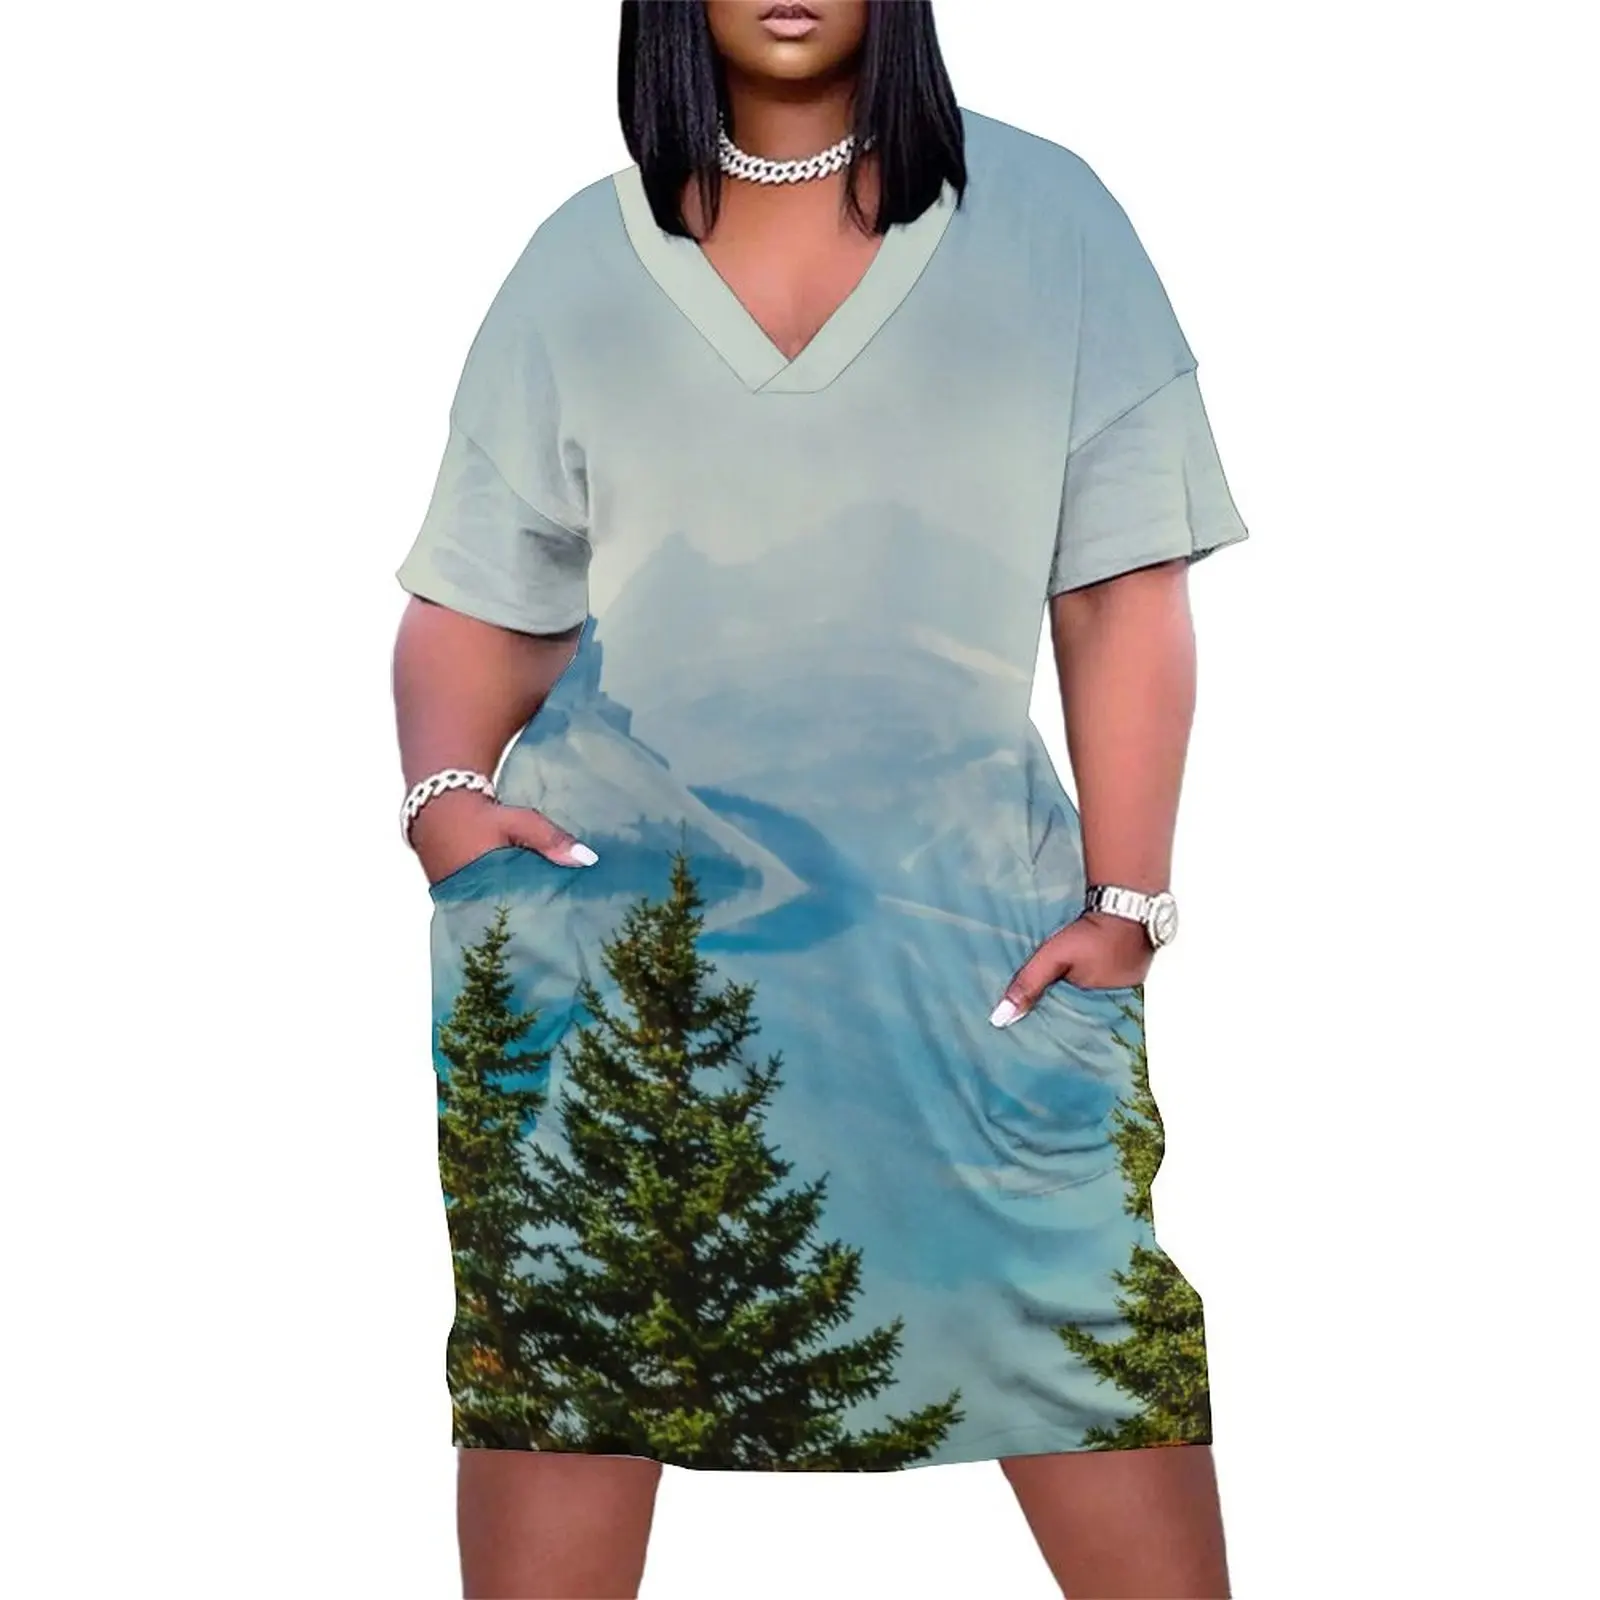 Winter Mountains Dress Short Sleeve Tree And Lake Print Aesthetic Dresses Summer Cute Casual Dress Female Plus Size Vestidos